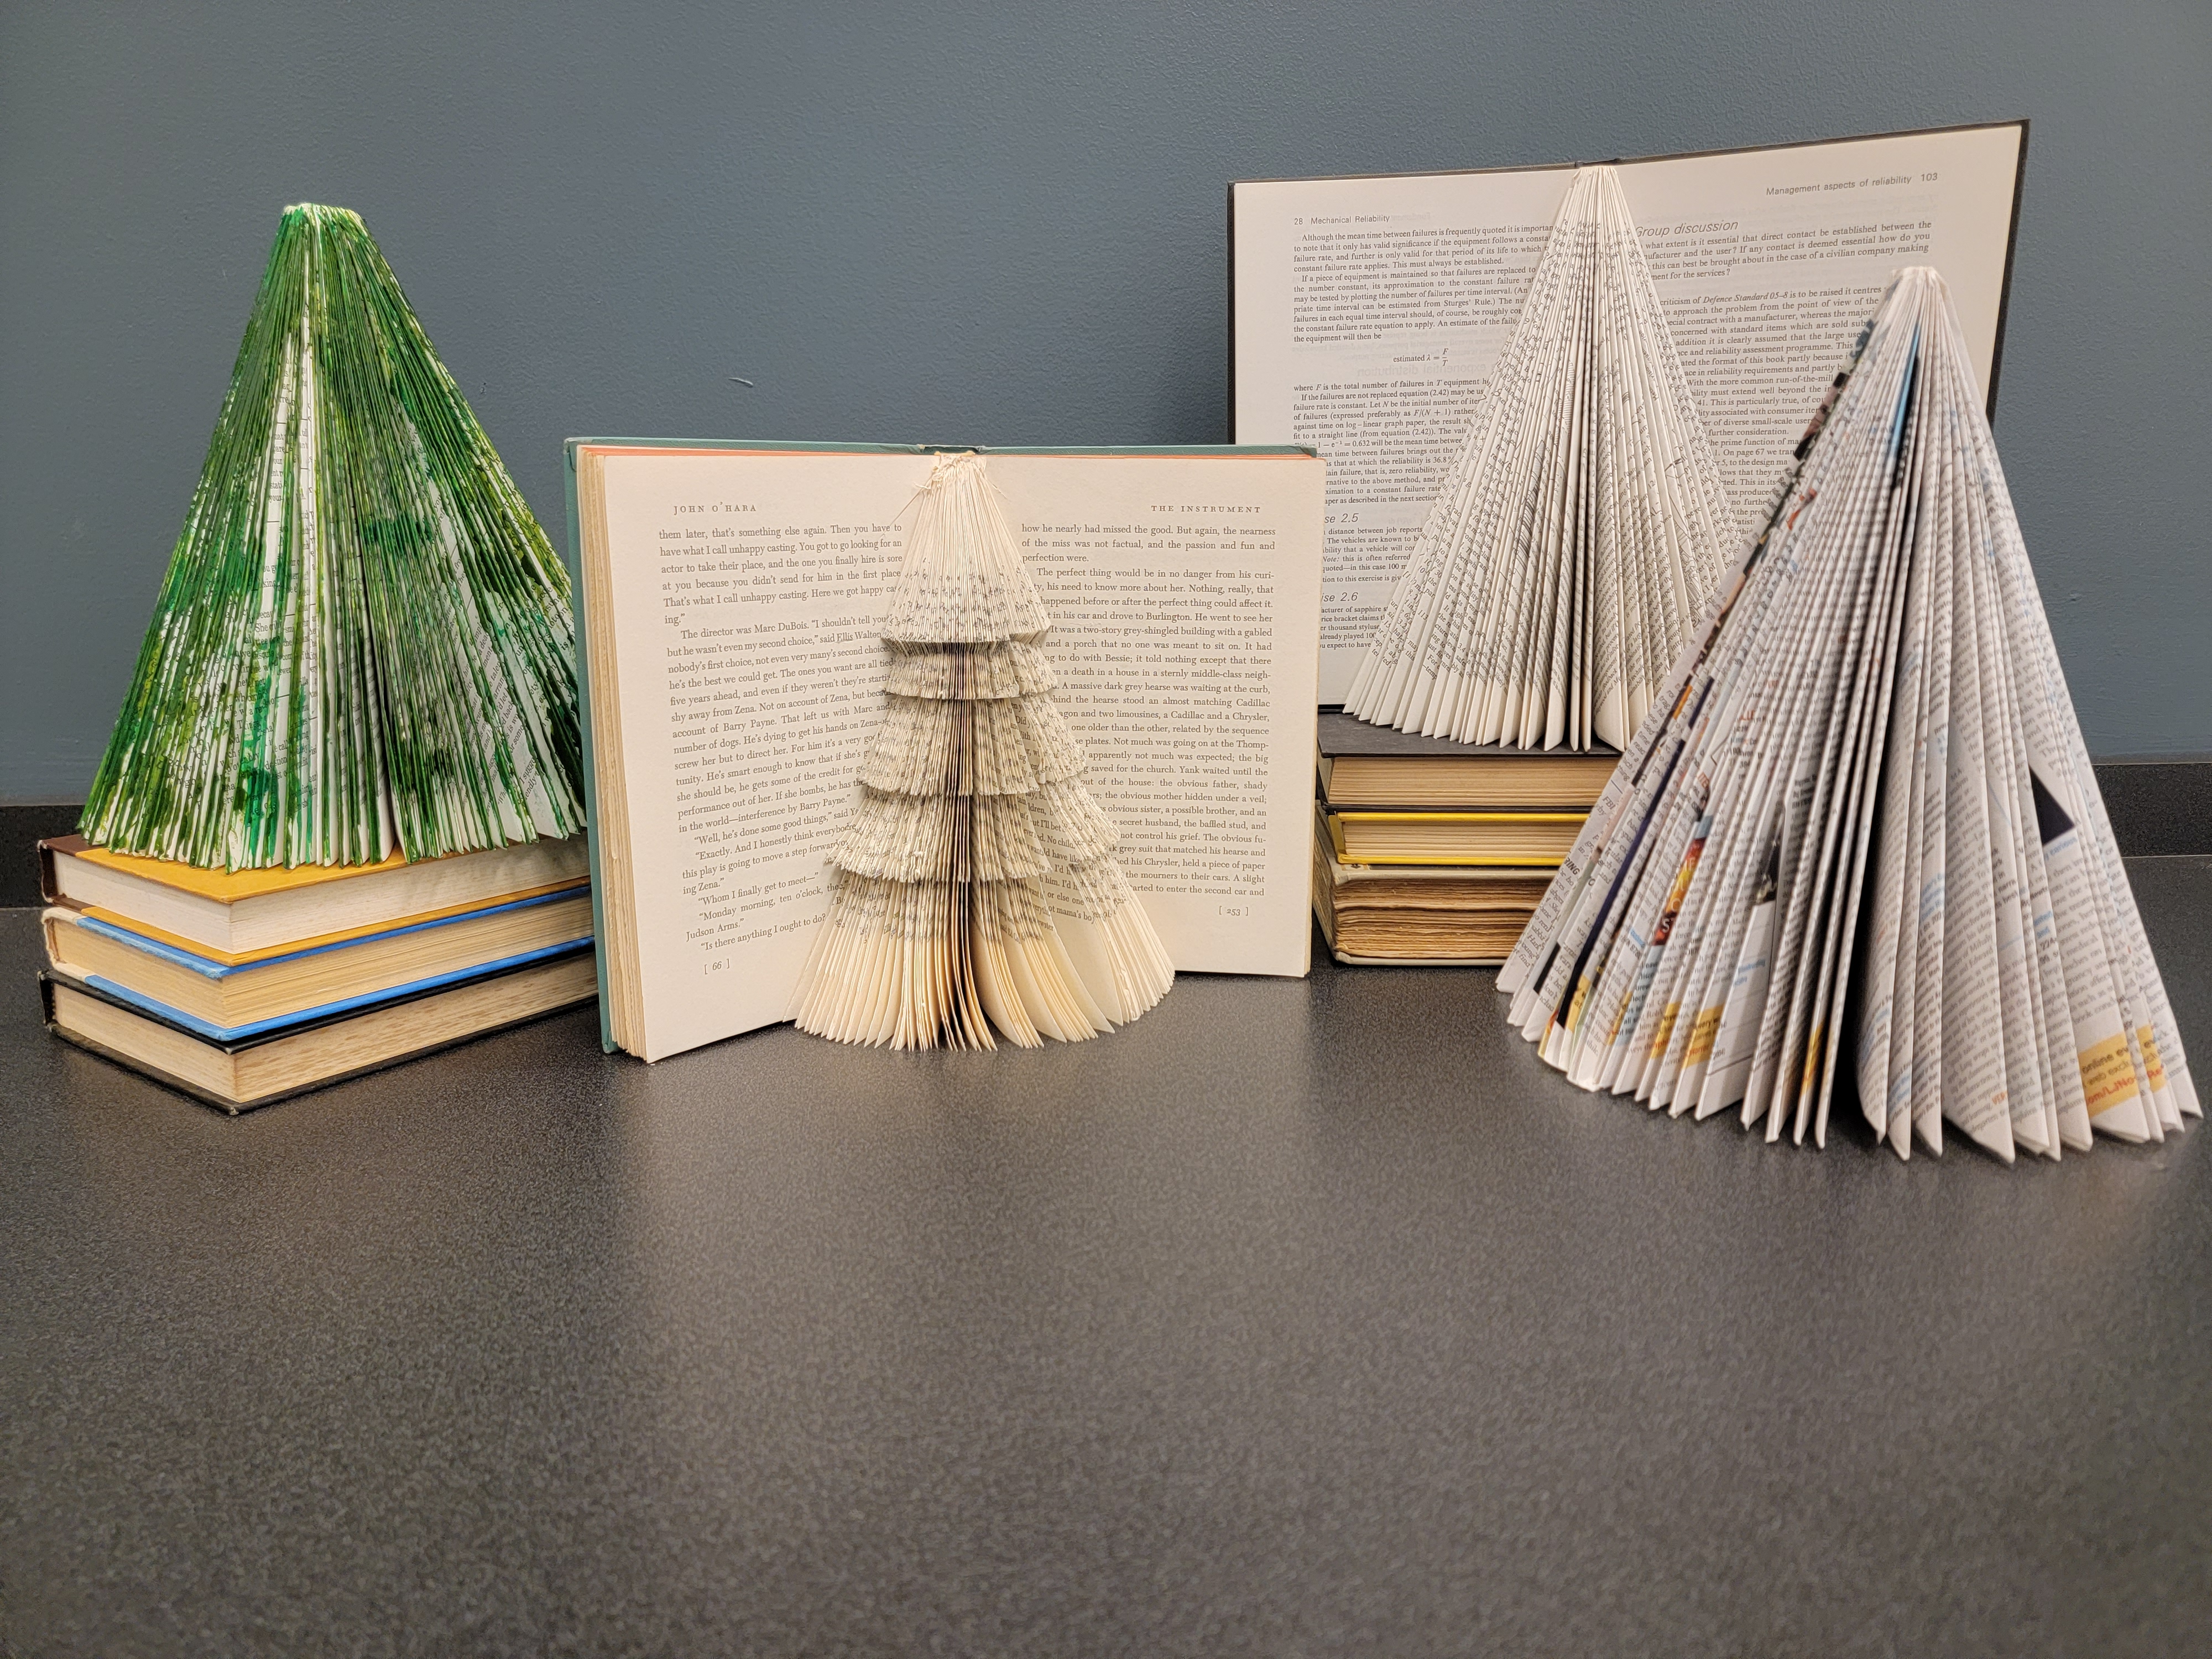 several trees made from books